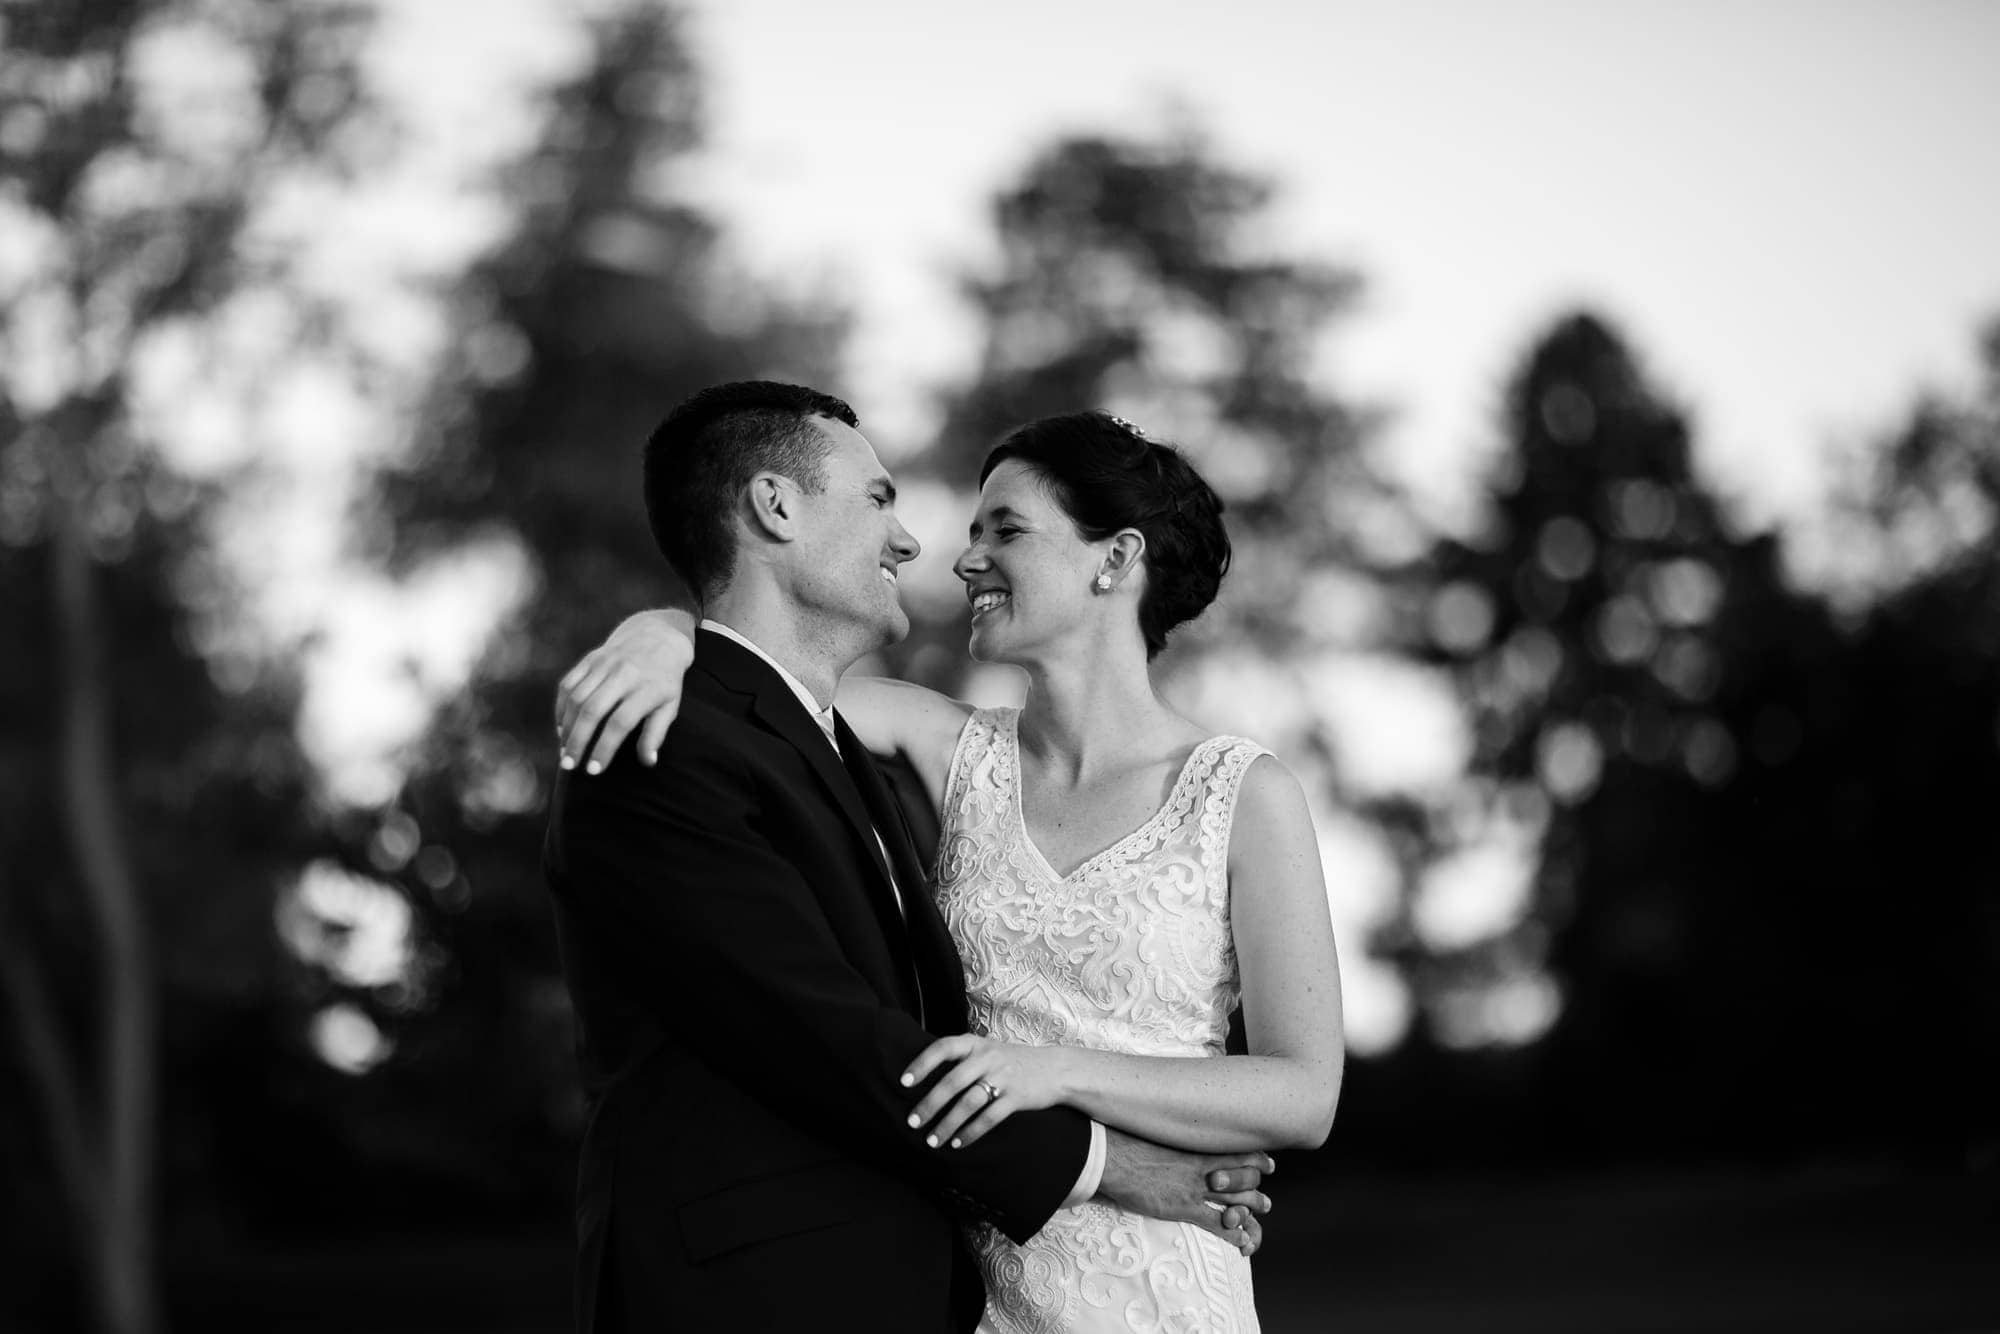 Denver Museum of Nature and Science wedding photos by Justin Edmonds Photography